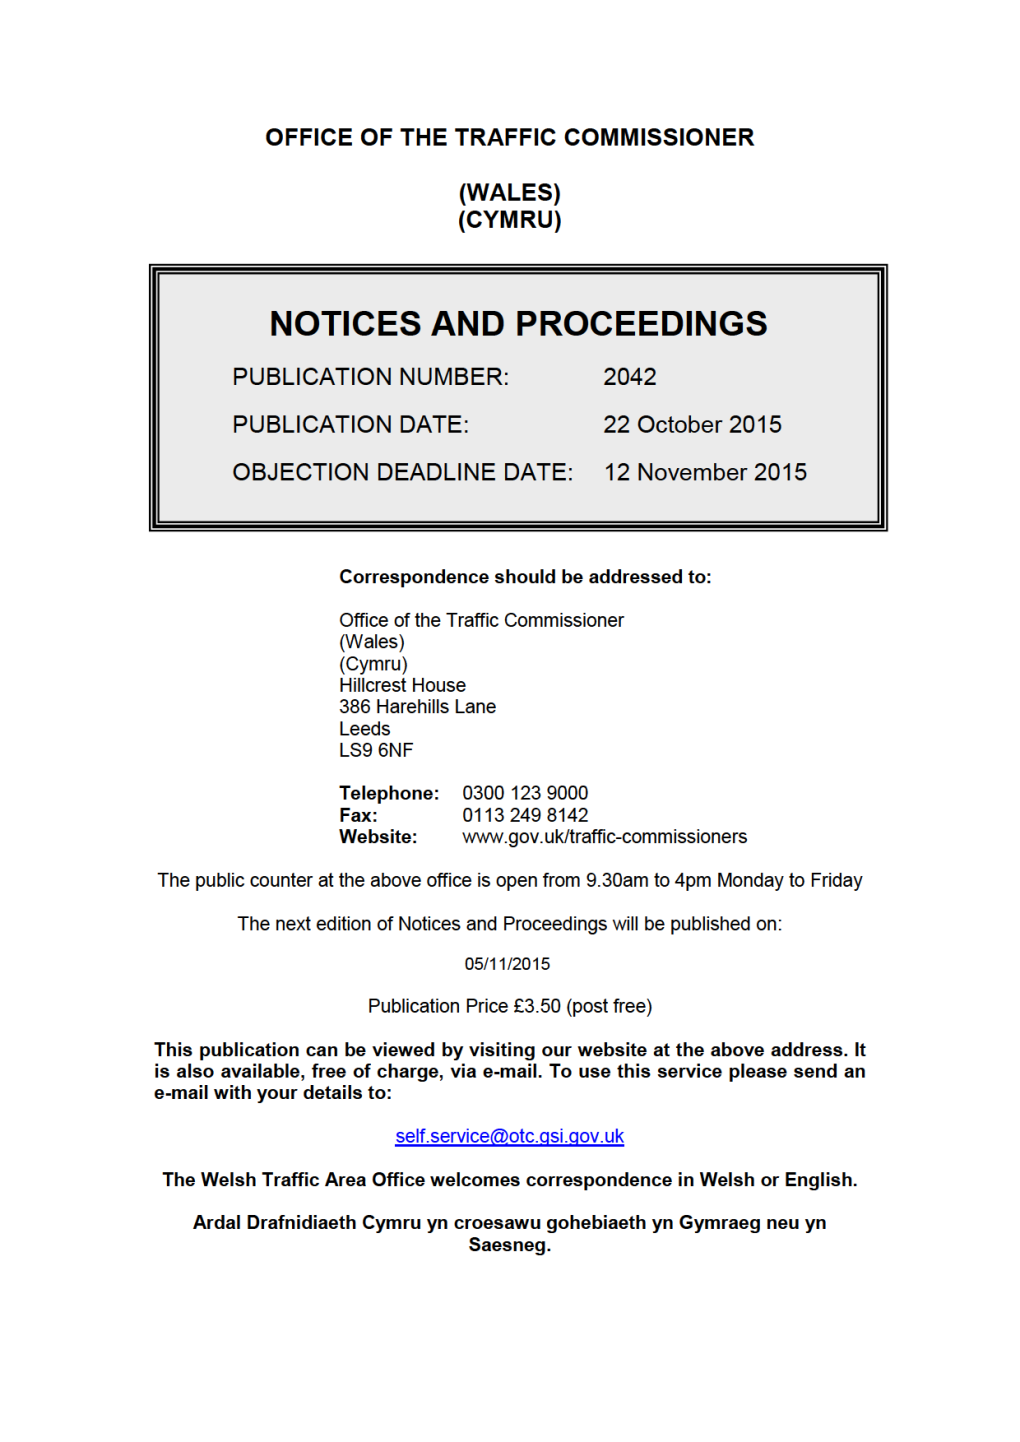 NOTICES and PROCEEDINGS 22 October 2015